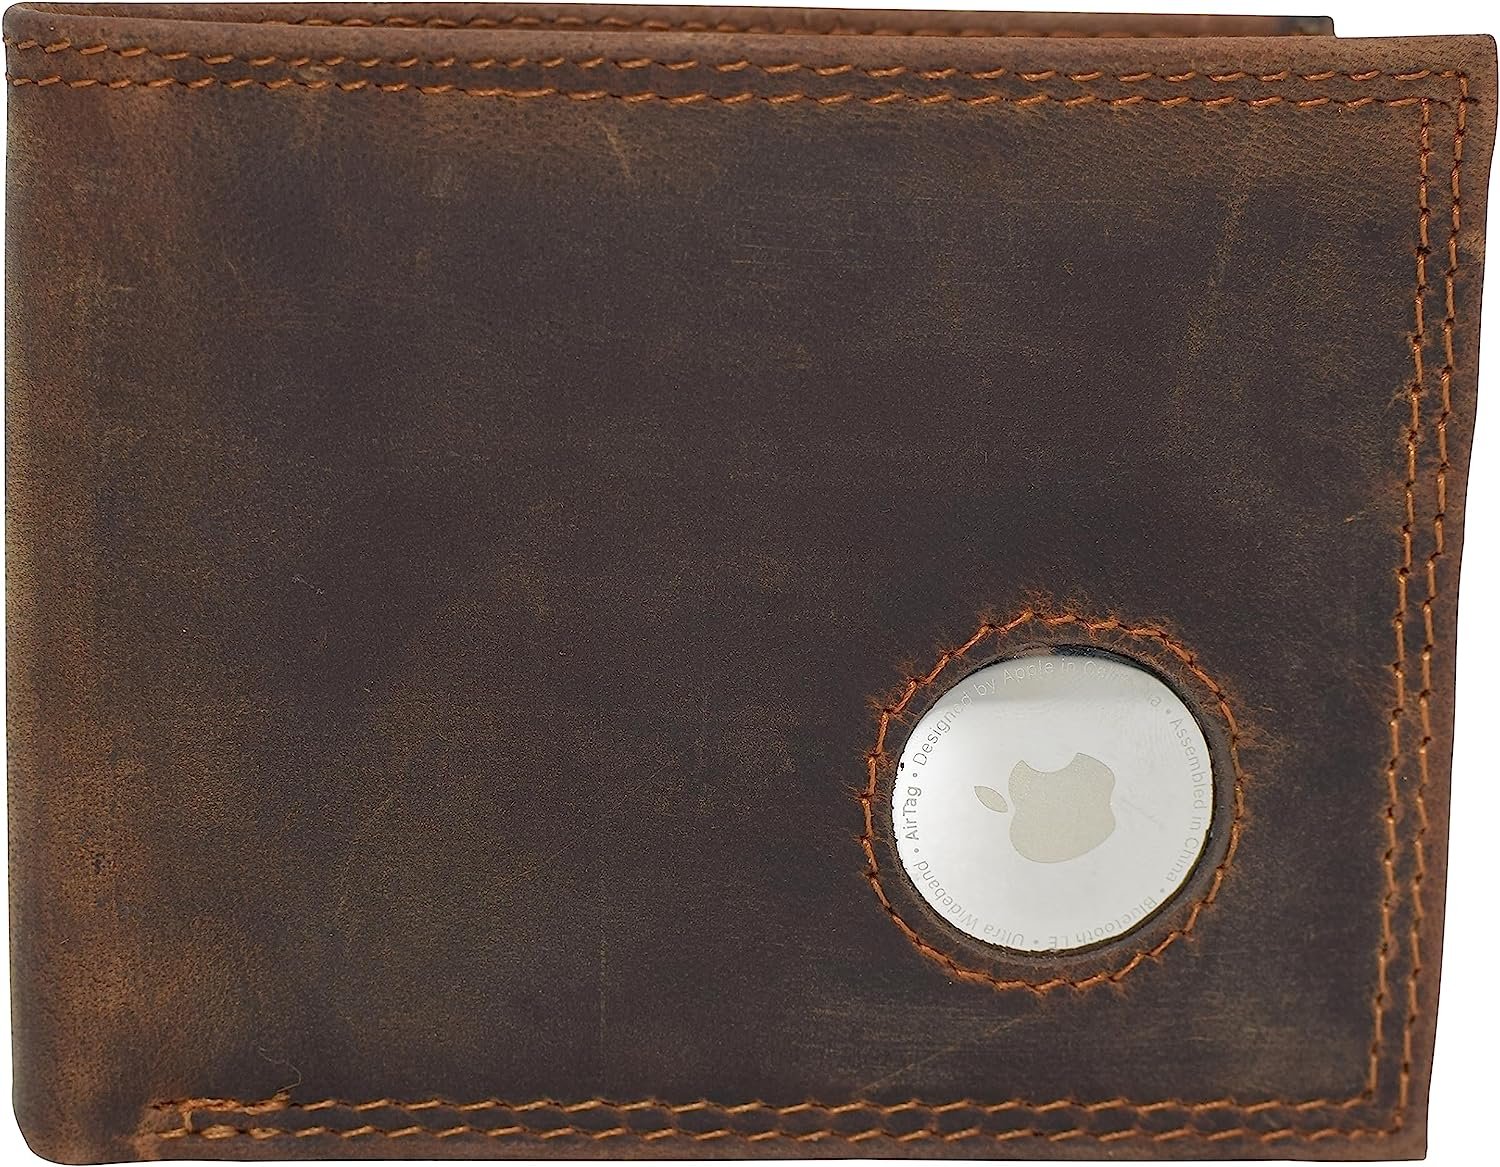 Minimalist AirTag Wallet, Handmade Leather Wallet With an AirTag Pocket